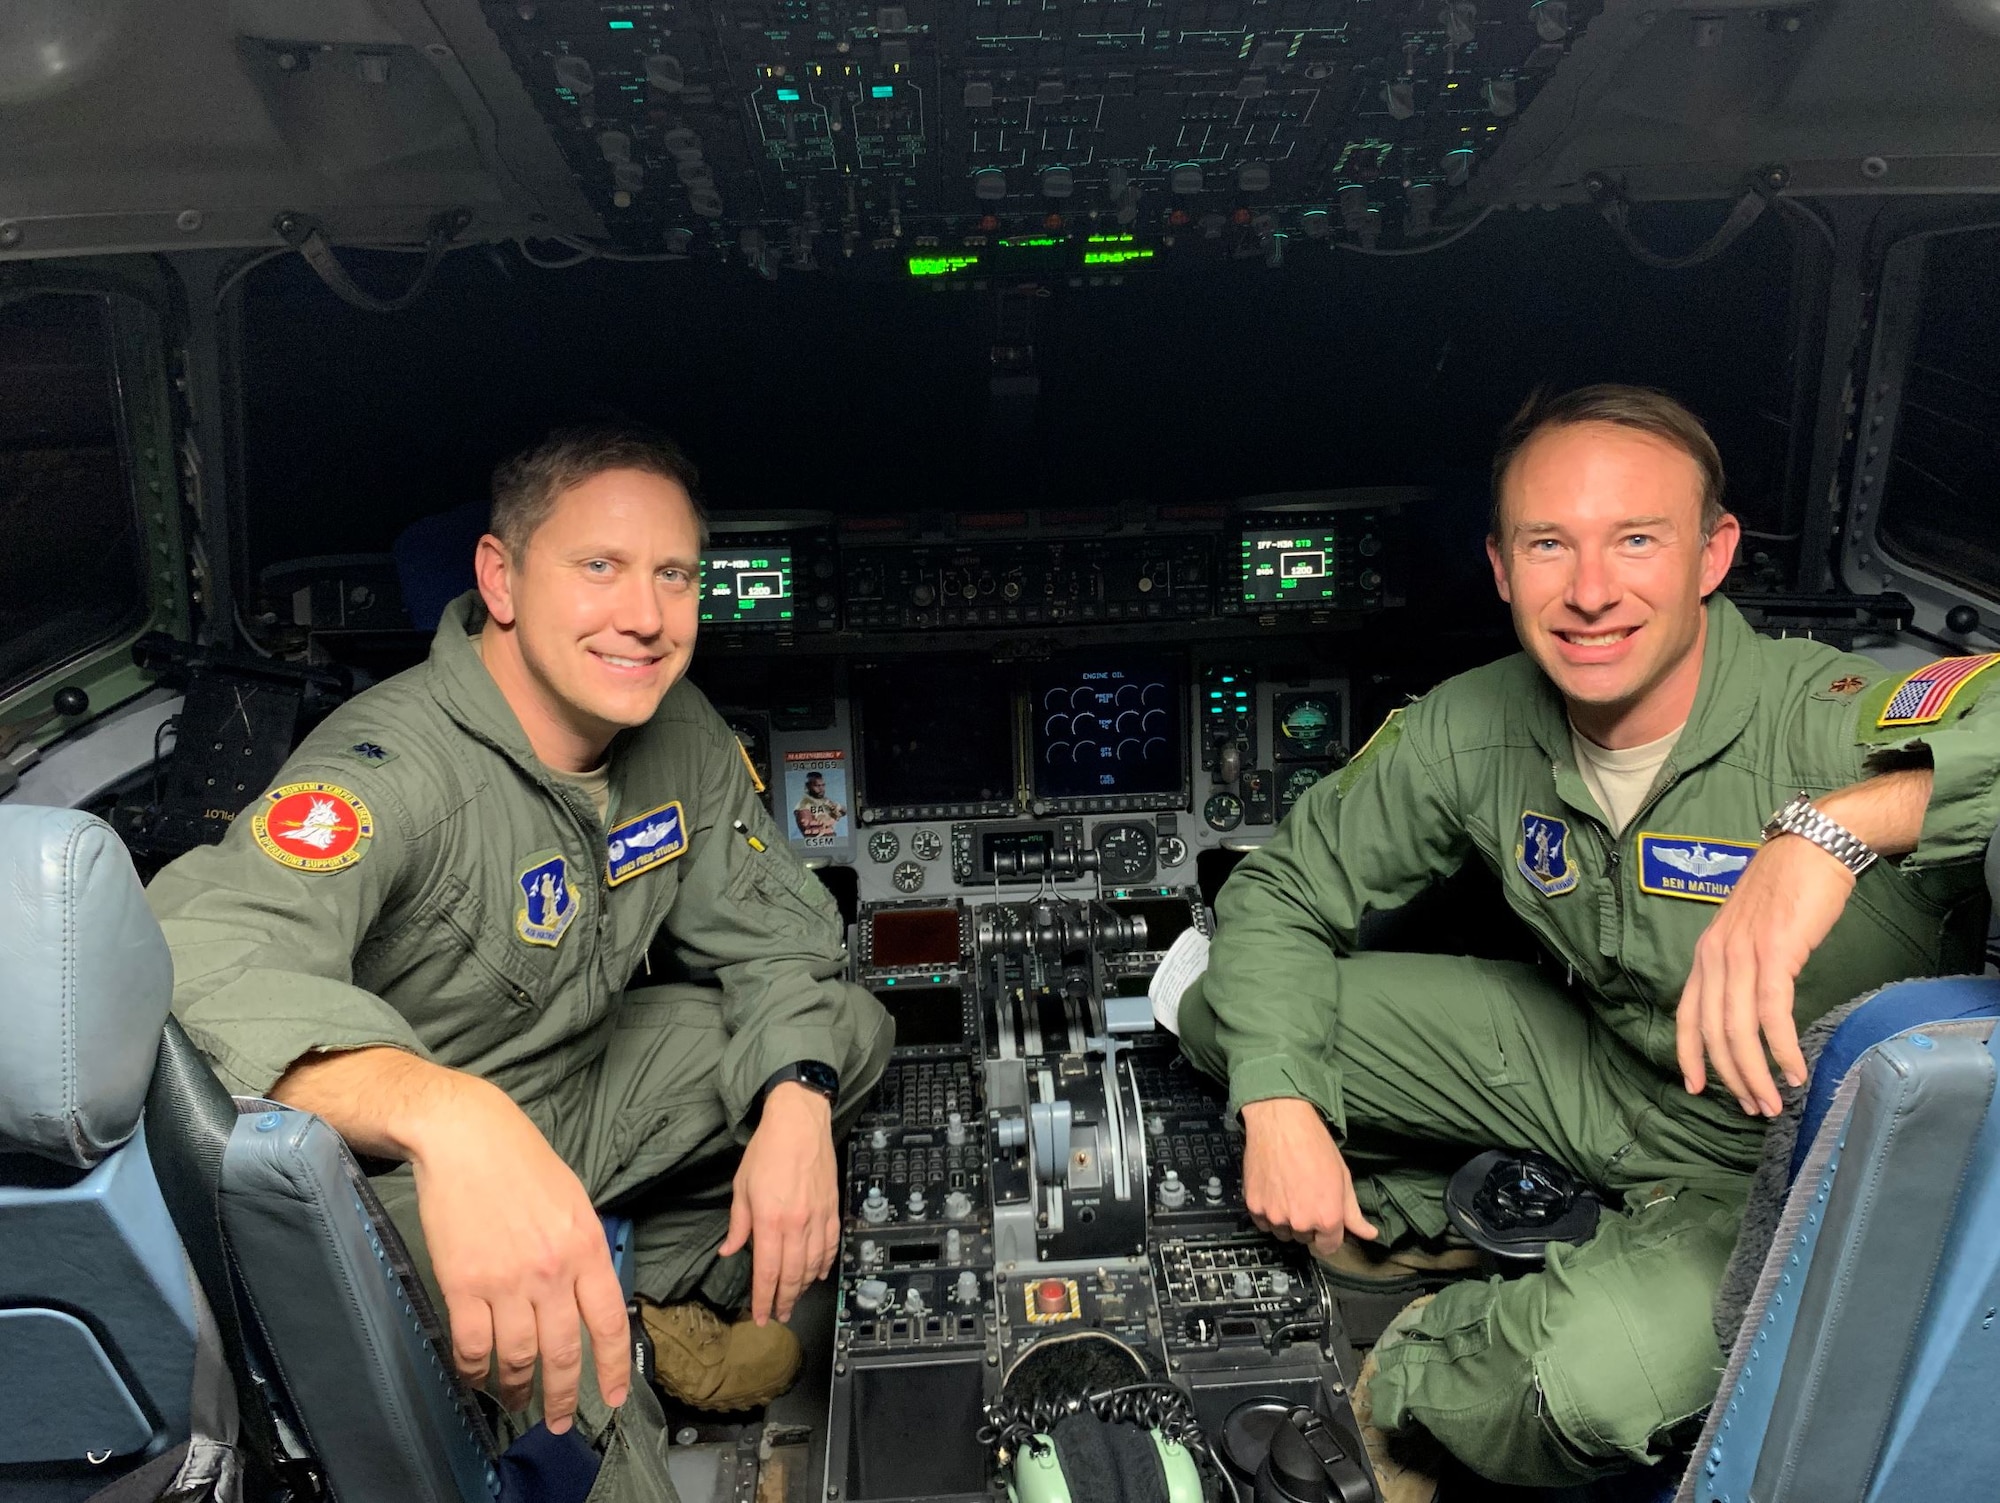 Lt. Col. James Freid-Studlo, 167th Operations Support Squadron commander, and Maj. Ben Mathias 167th Force Support Squadron commander, sit in the C-17 aircraft simulator at the 167th Airlift Wing, Martinsburg, W.Va. Freid-Studlo and Mathias both recently underwent pilot requalification training in the simulator after serving in other positions and not flying aircraft for an extended period of time.